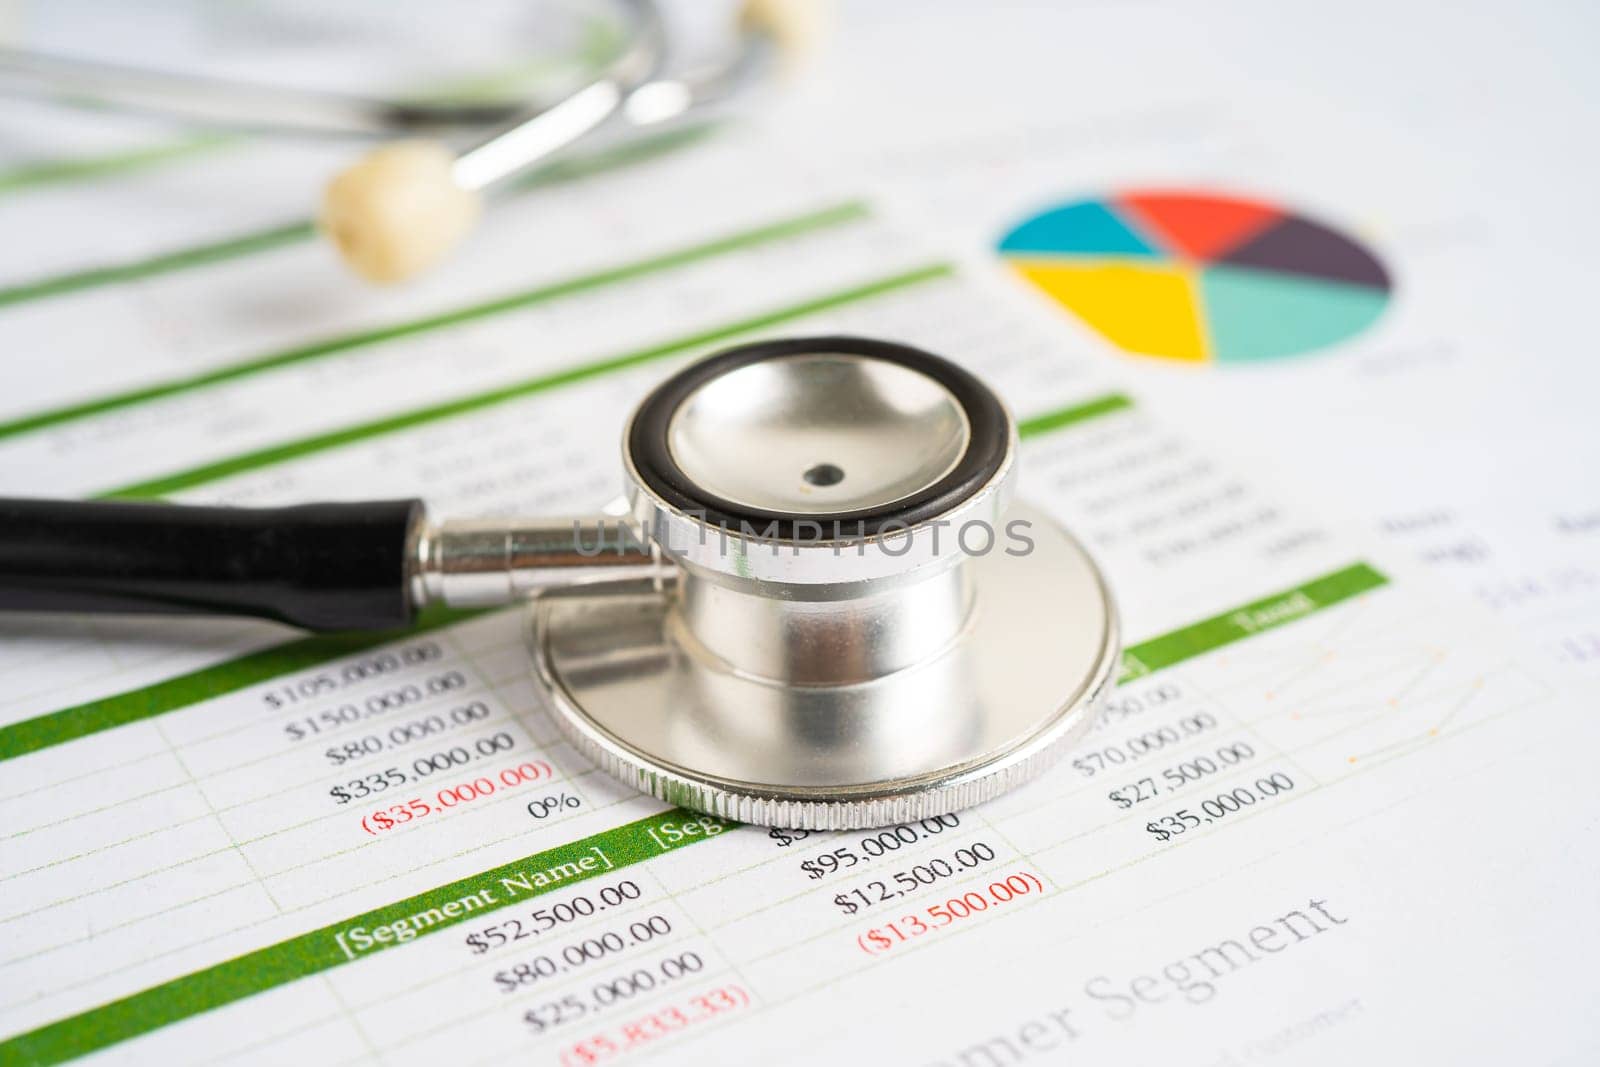 Stethoscope on spreadsheet and graph paper, Finance, Account, Statistics, Investment, Analytic research data economy and Business company concept.